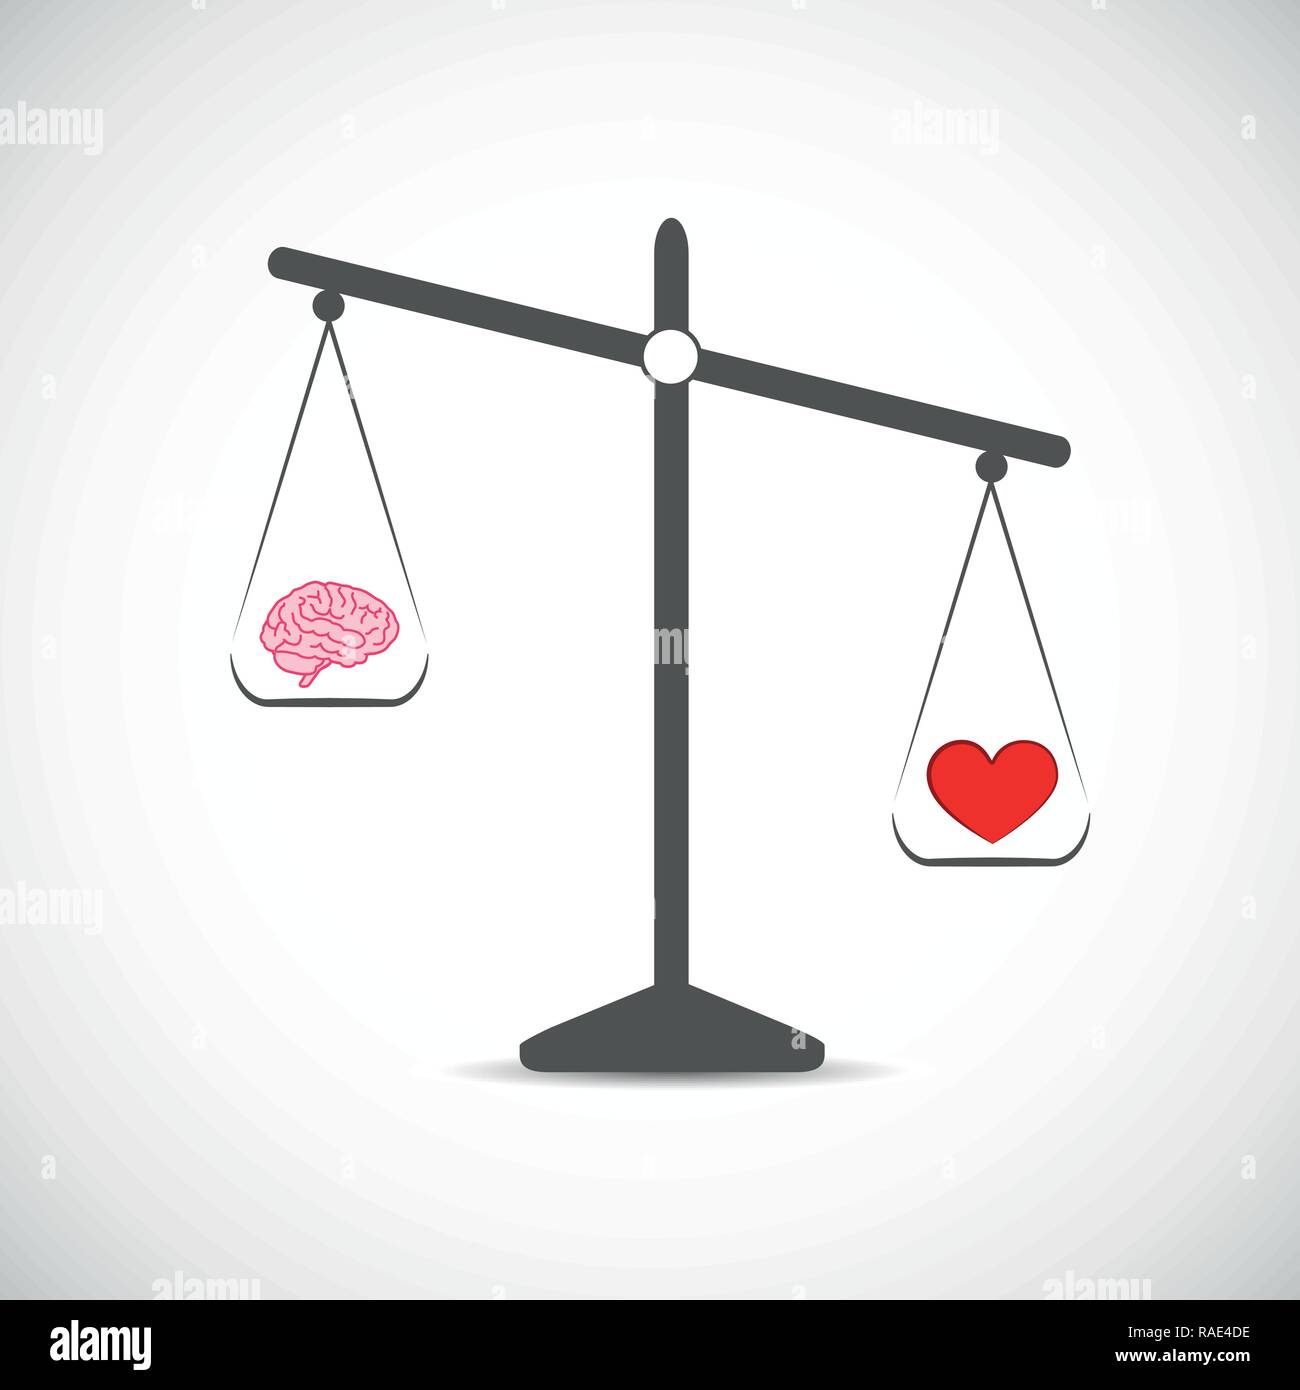 brain and red hearth in balance vector illustration Stock Vector